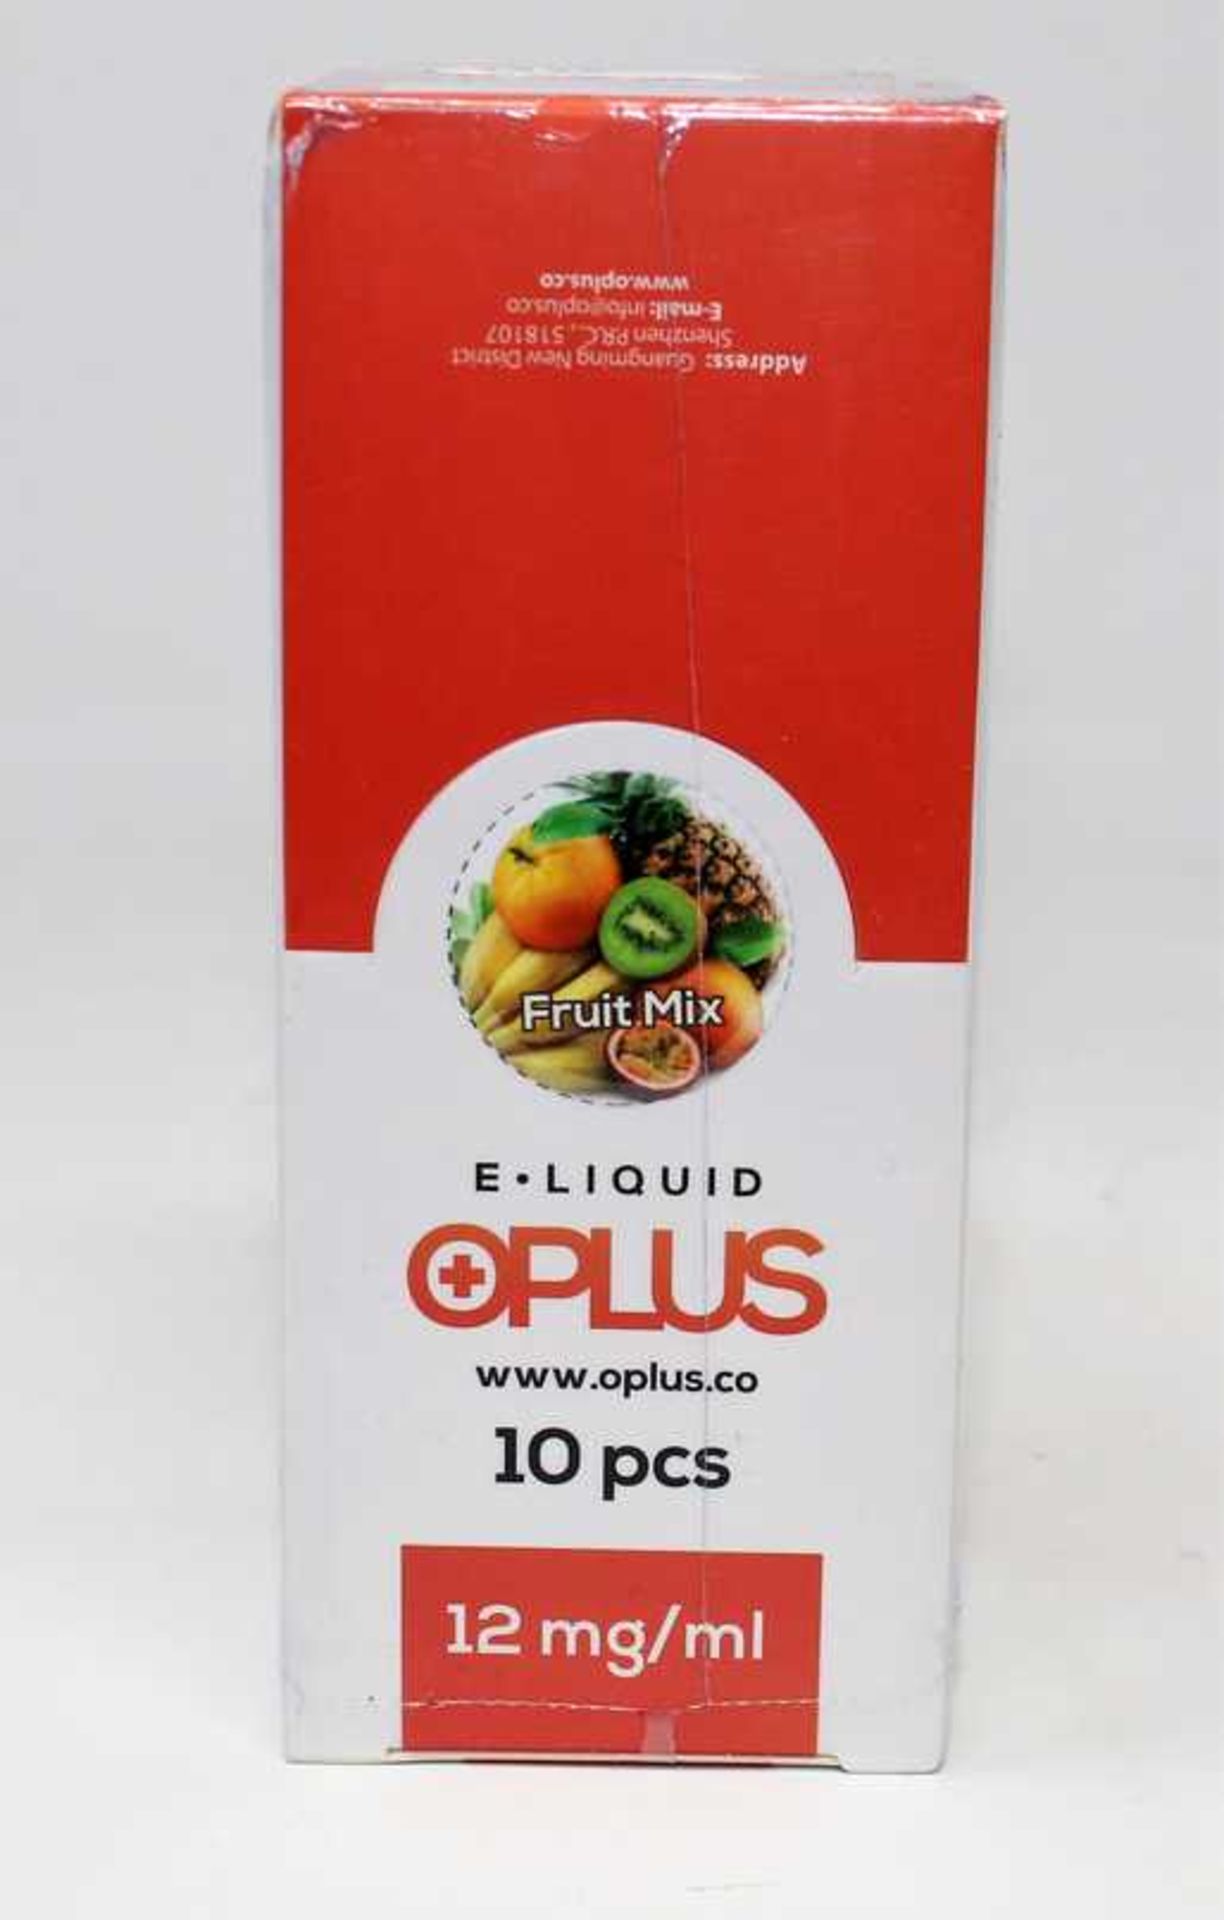 Six boxes of ten (10ml) OPLus E-Liquid in Fruit Mix and American Blend 12mg/ml (Over 18s only).